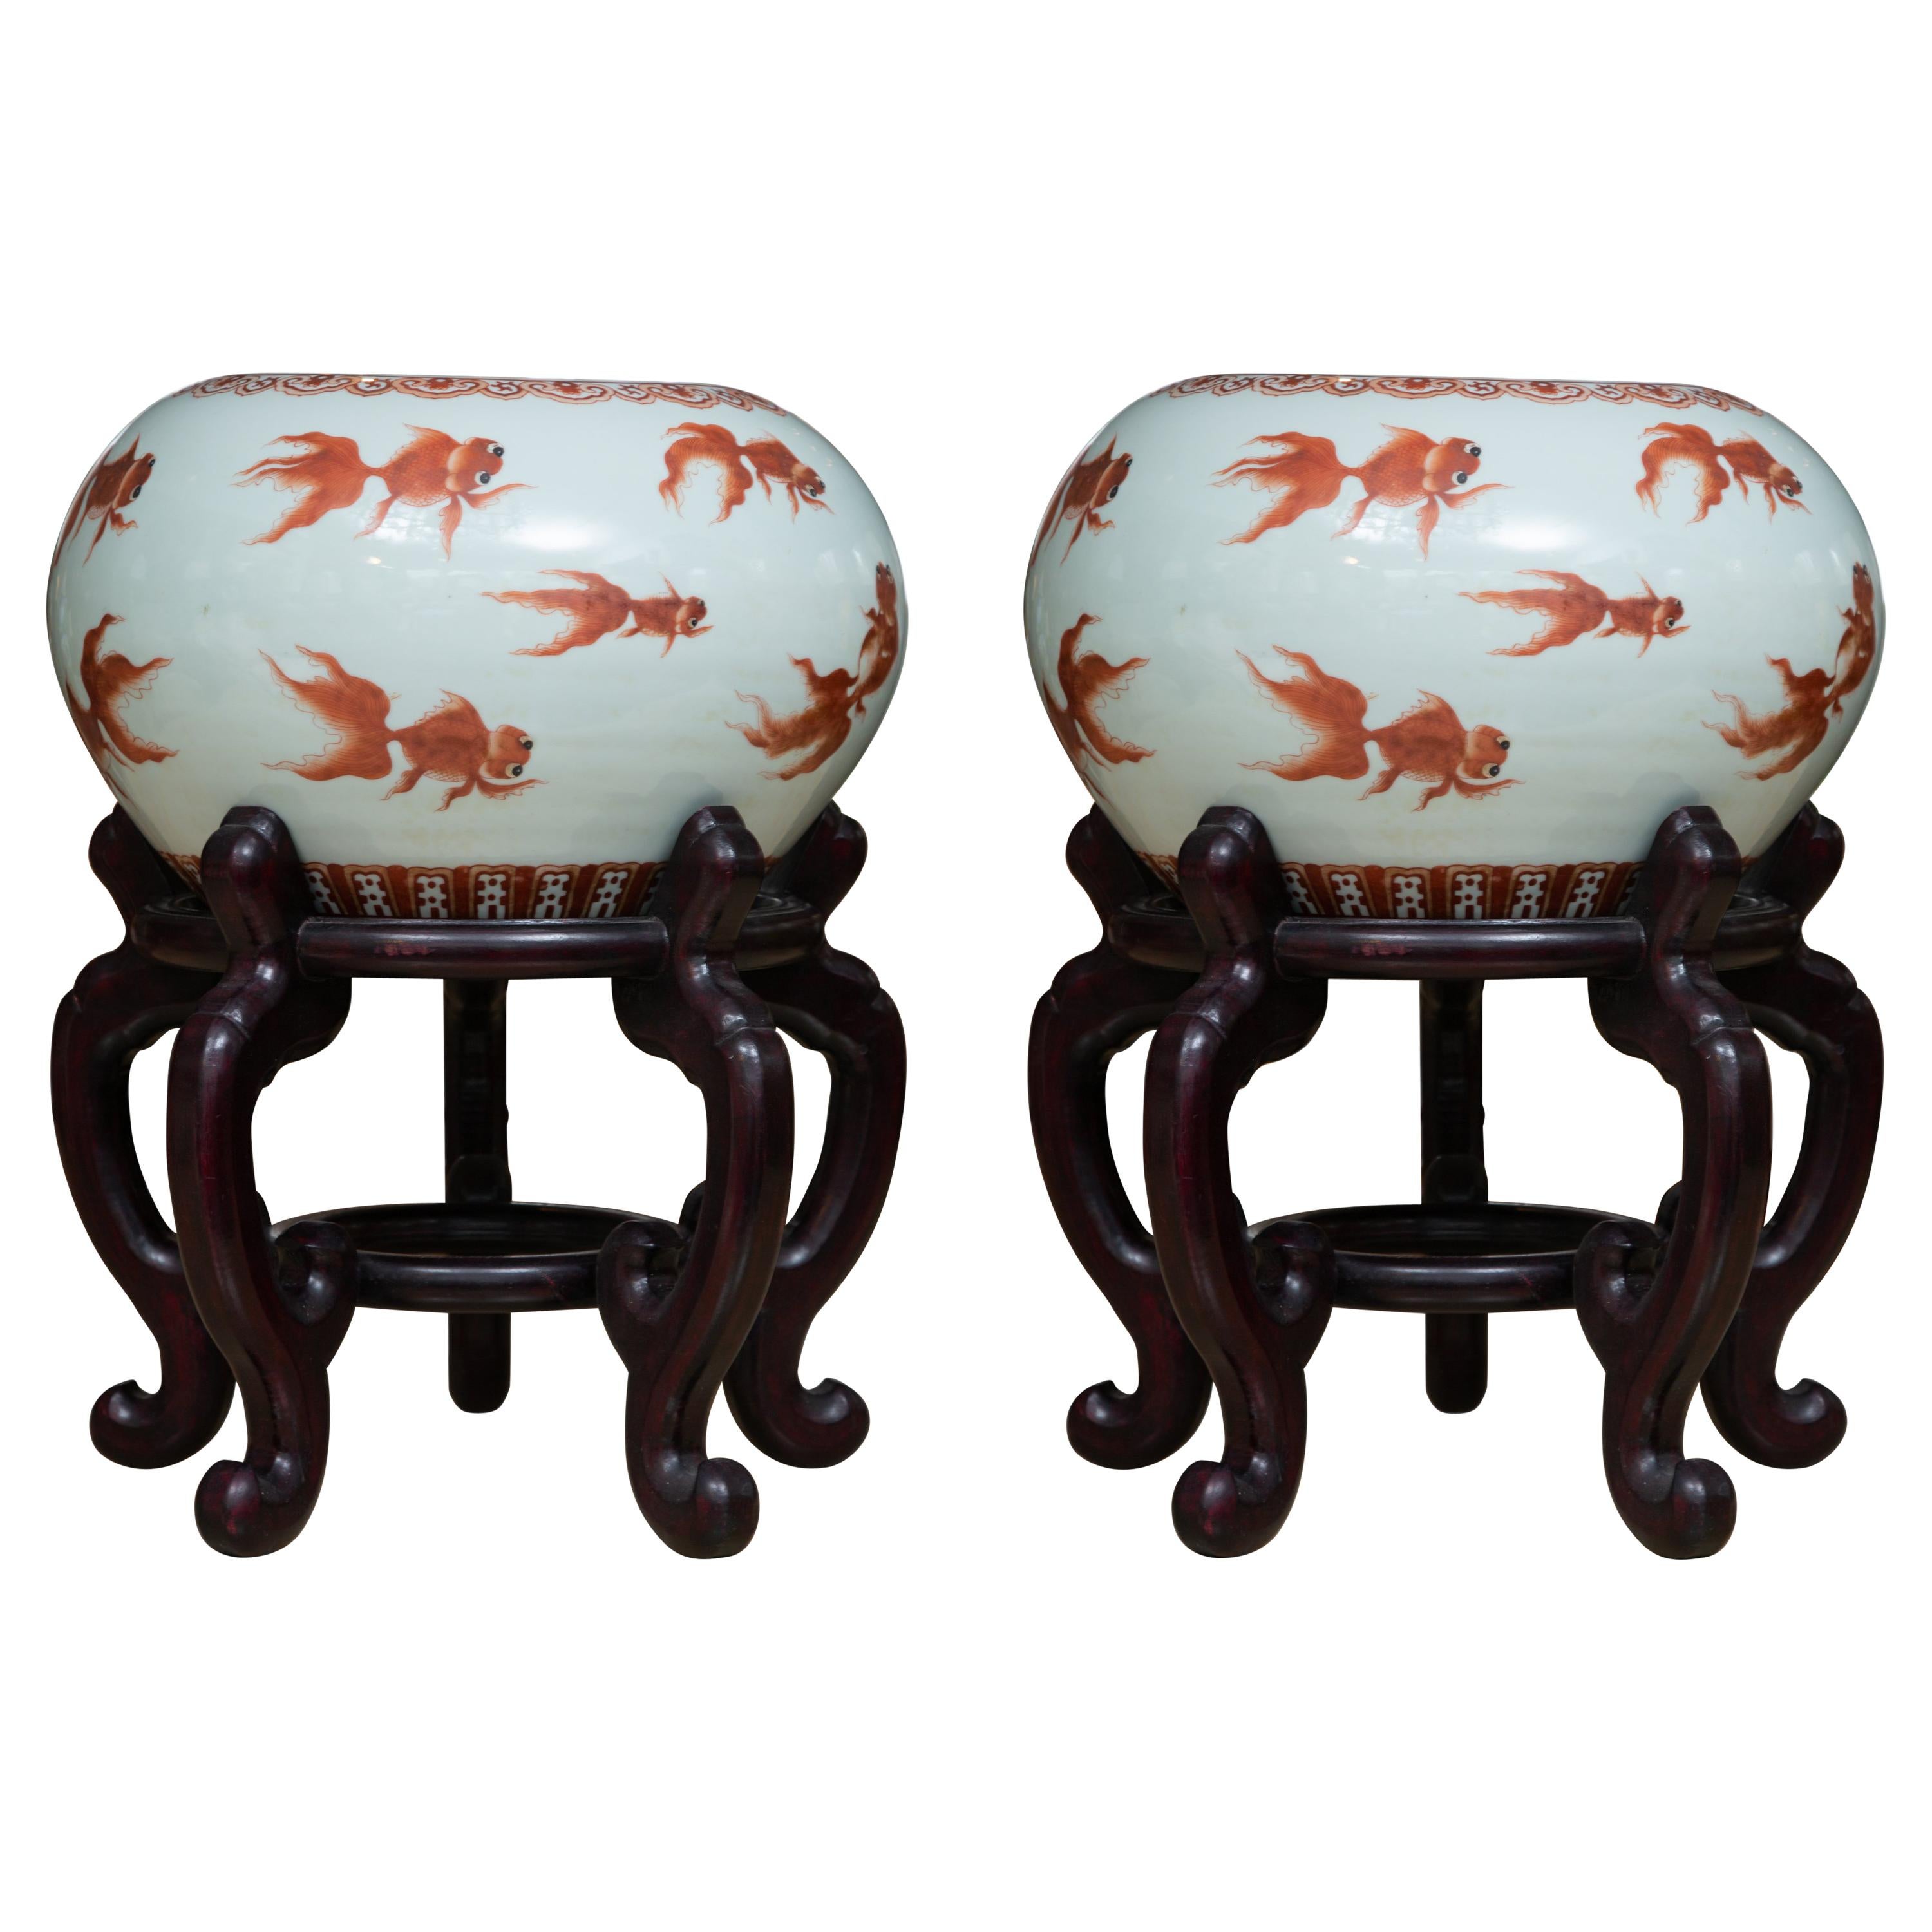 Chinese Porcelain Fish Bowls on Rosewood Stands